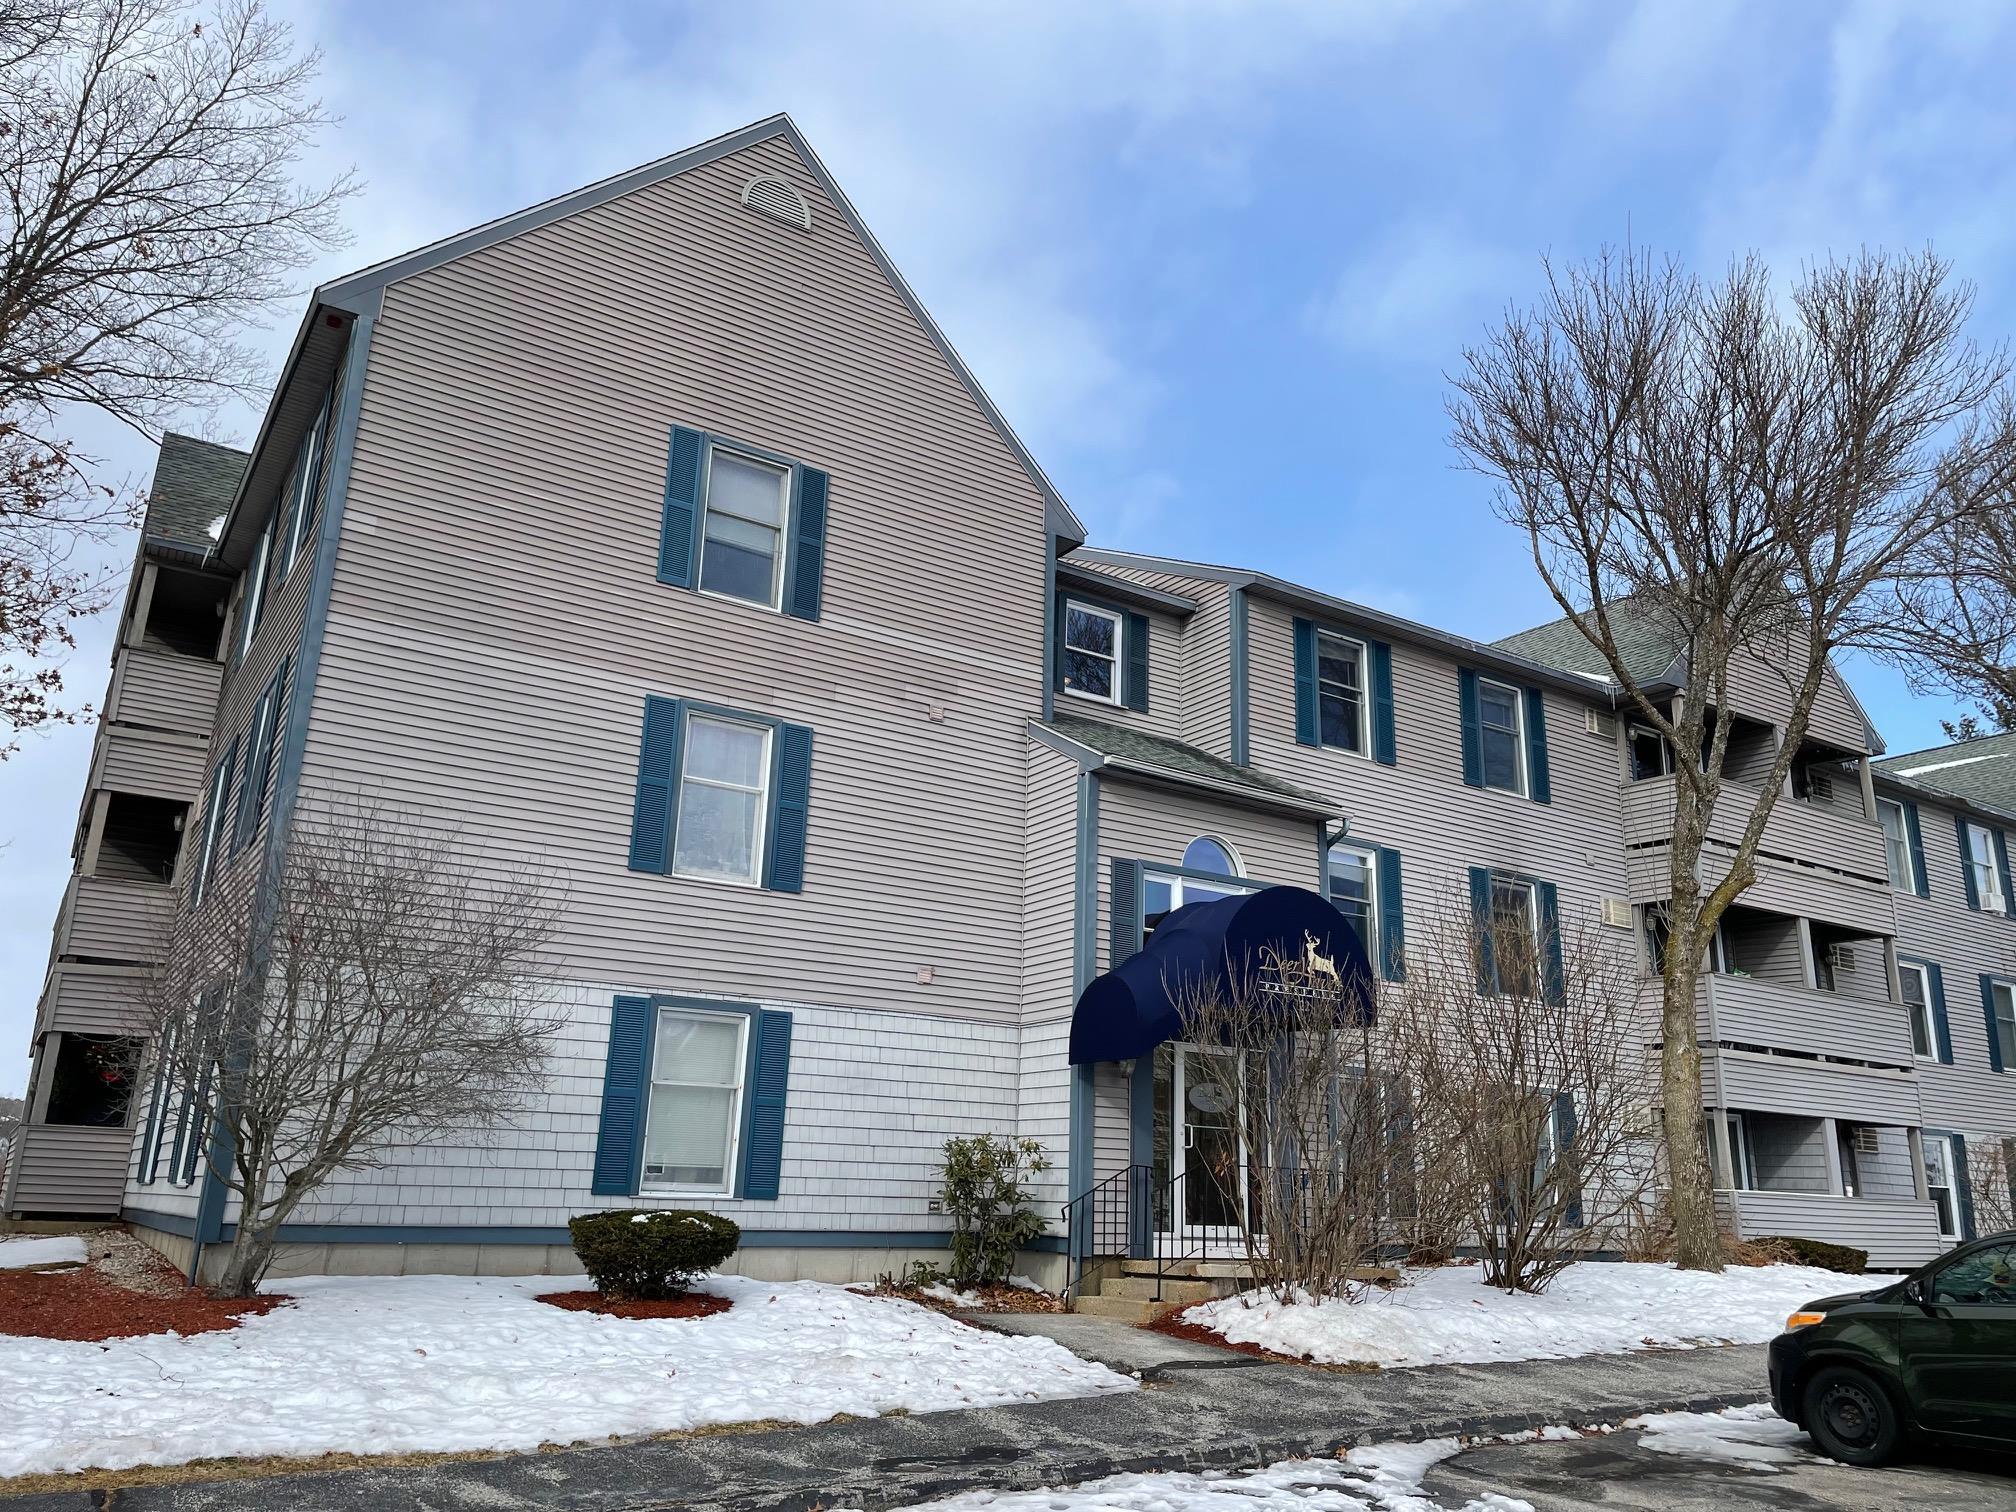 122 Eastern Avenue, Manchester, New Hampshire, NH 03104, 2 Bedrooms Bedrooms, 4 Rooms Rooms,1 BathroomBathrooms,Condos,For Rent,4895568